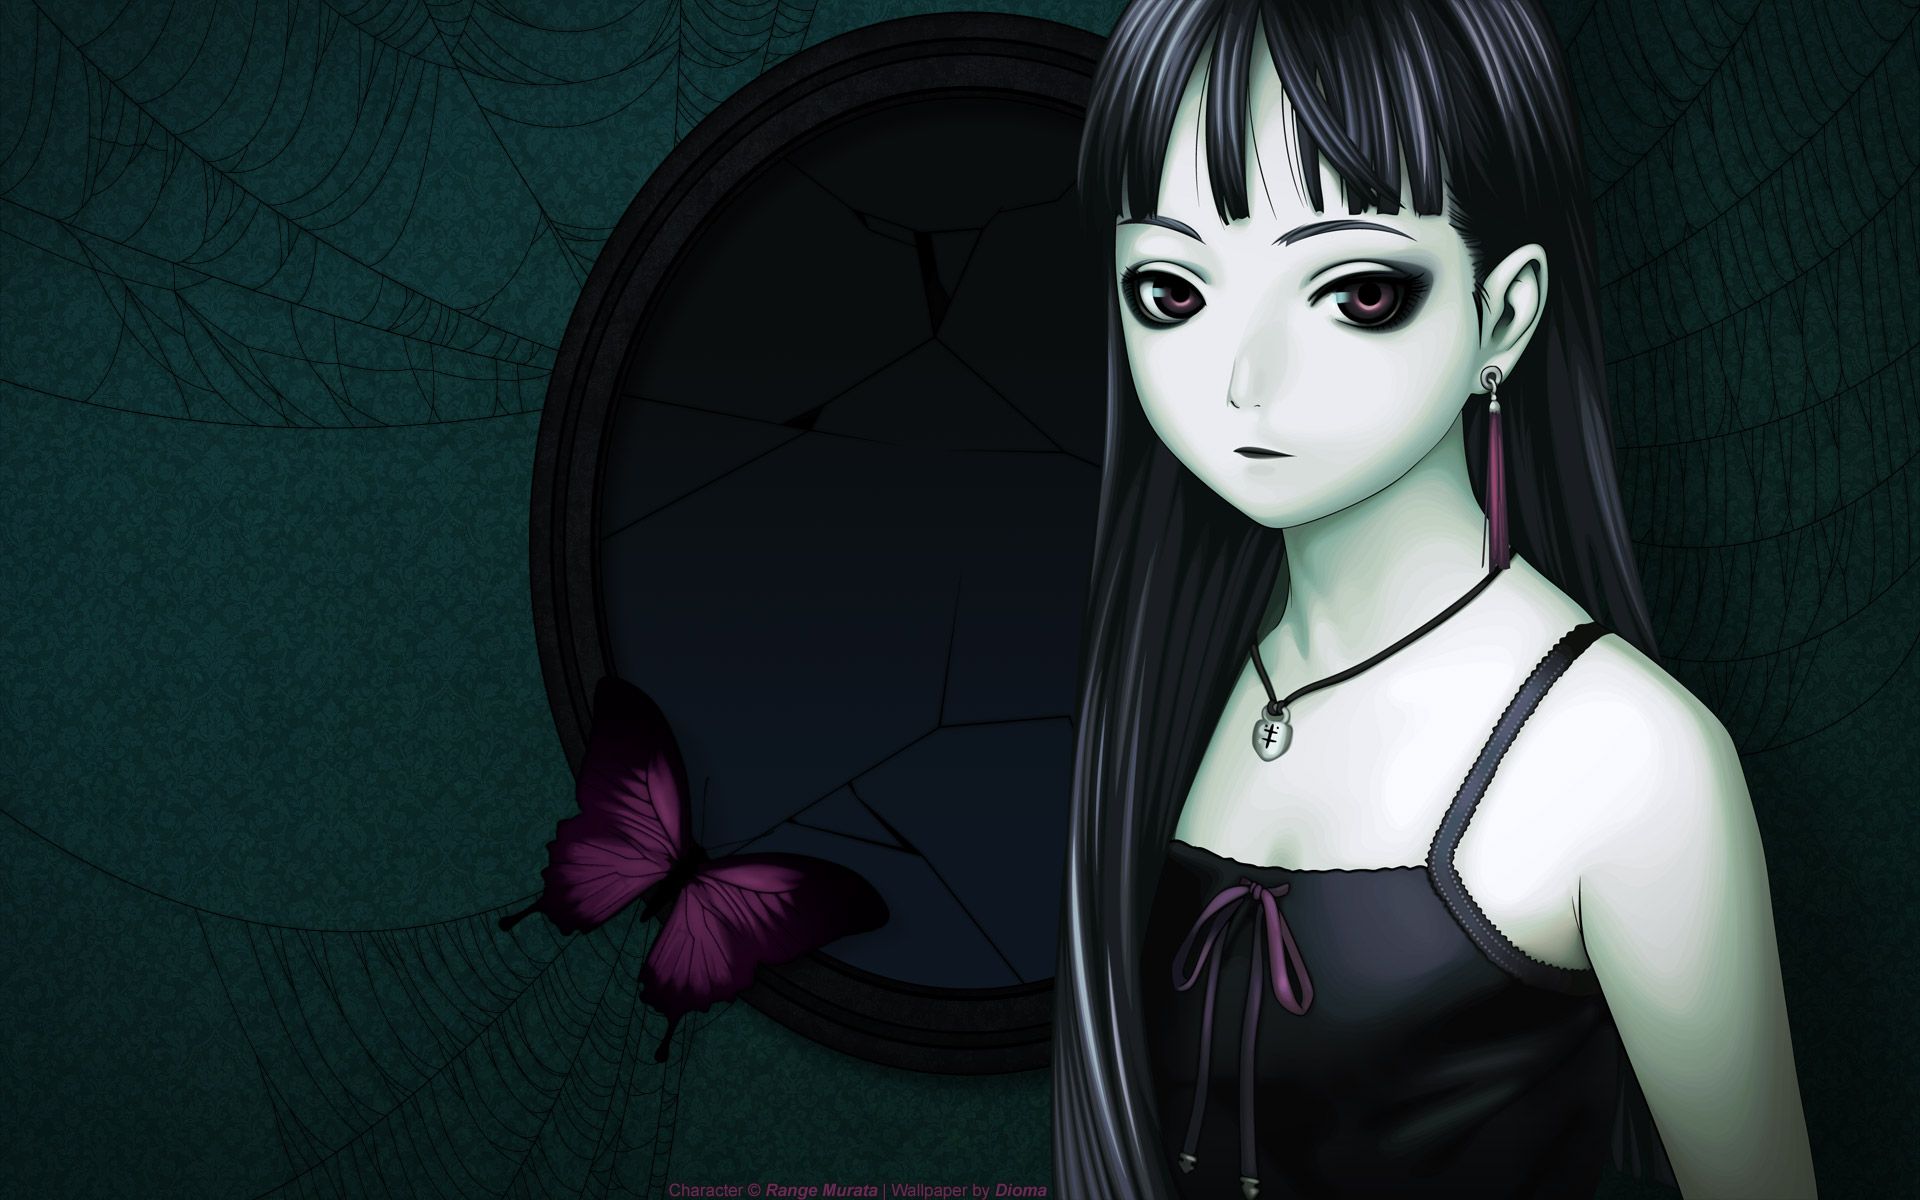 Download Anime Goth Girl Wallpaper 1920x1200 | Full HD Wallpapers